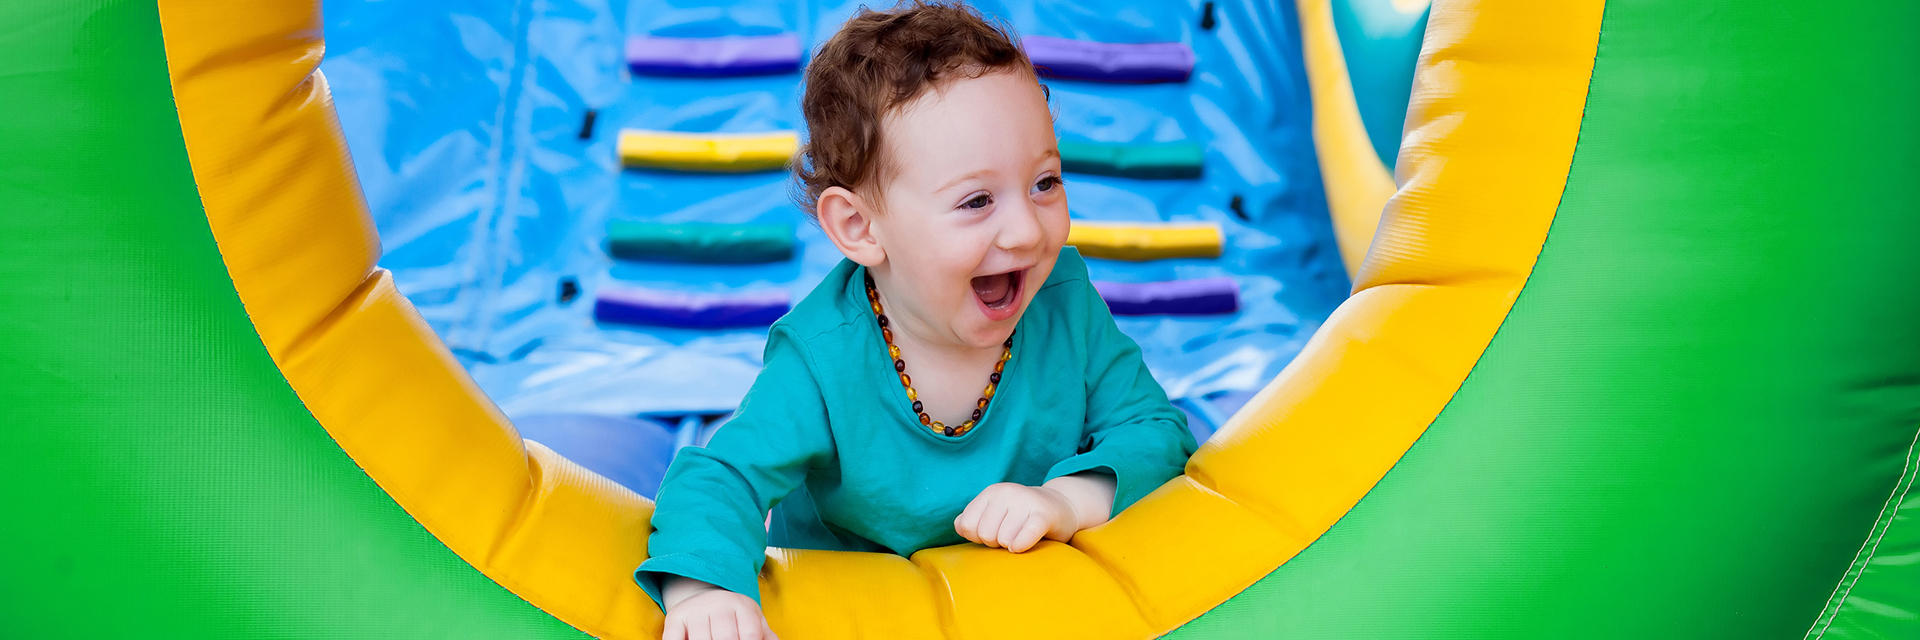 Smiling boy playing in bounce house